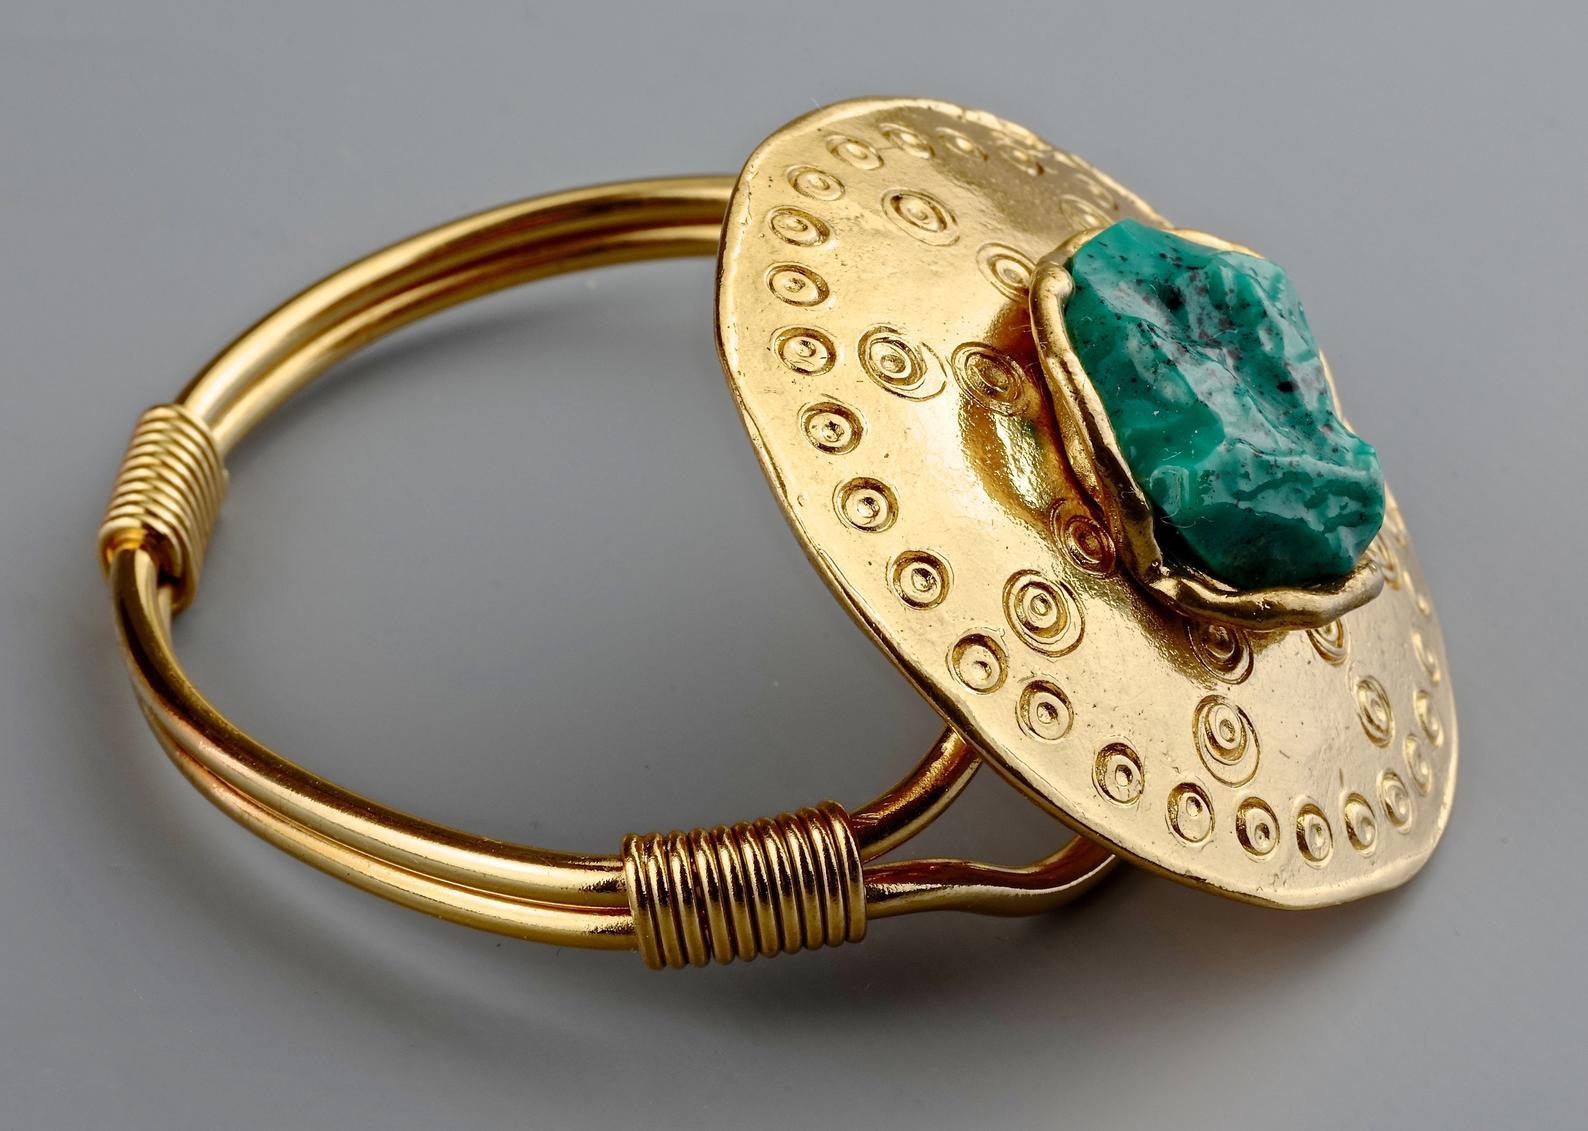 Vintage YVES SAINT LAURENT Ysl by Robert Goossens Ethnic Turquoise Stone Disc Medallion Cuff Bracelet

Measurements:
Height: 1.93 inches (4.9 cms)
Wearable Length: : 6.50 inches (16.5 cms)

Features:
- 100% Authentic YVES SAINT LAURENT by Robert